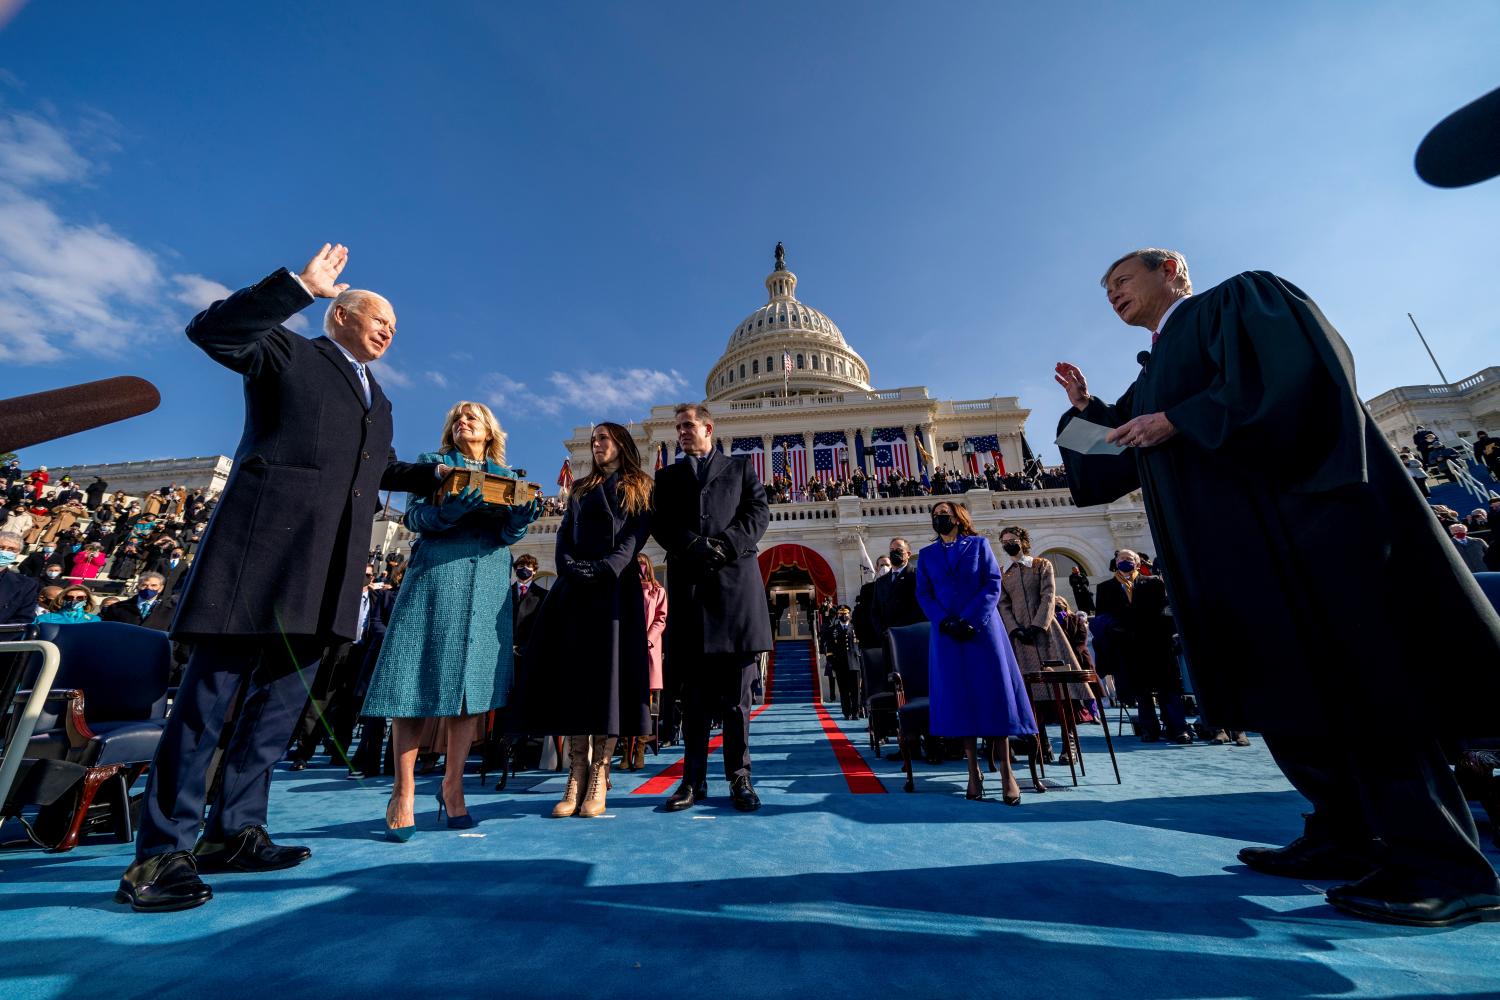 FILE PHOTO: Joe Biden is sworn in as the 46th president of the United States by Chief Justice John Roberts as Jill Biden holds the Bible during the 59th Presidential Inauguration at the U.S. Capitol, in Washington, U.S., January 20, 2021. Andrew Harnik/Pool via REUTERS/File Photo